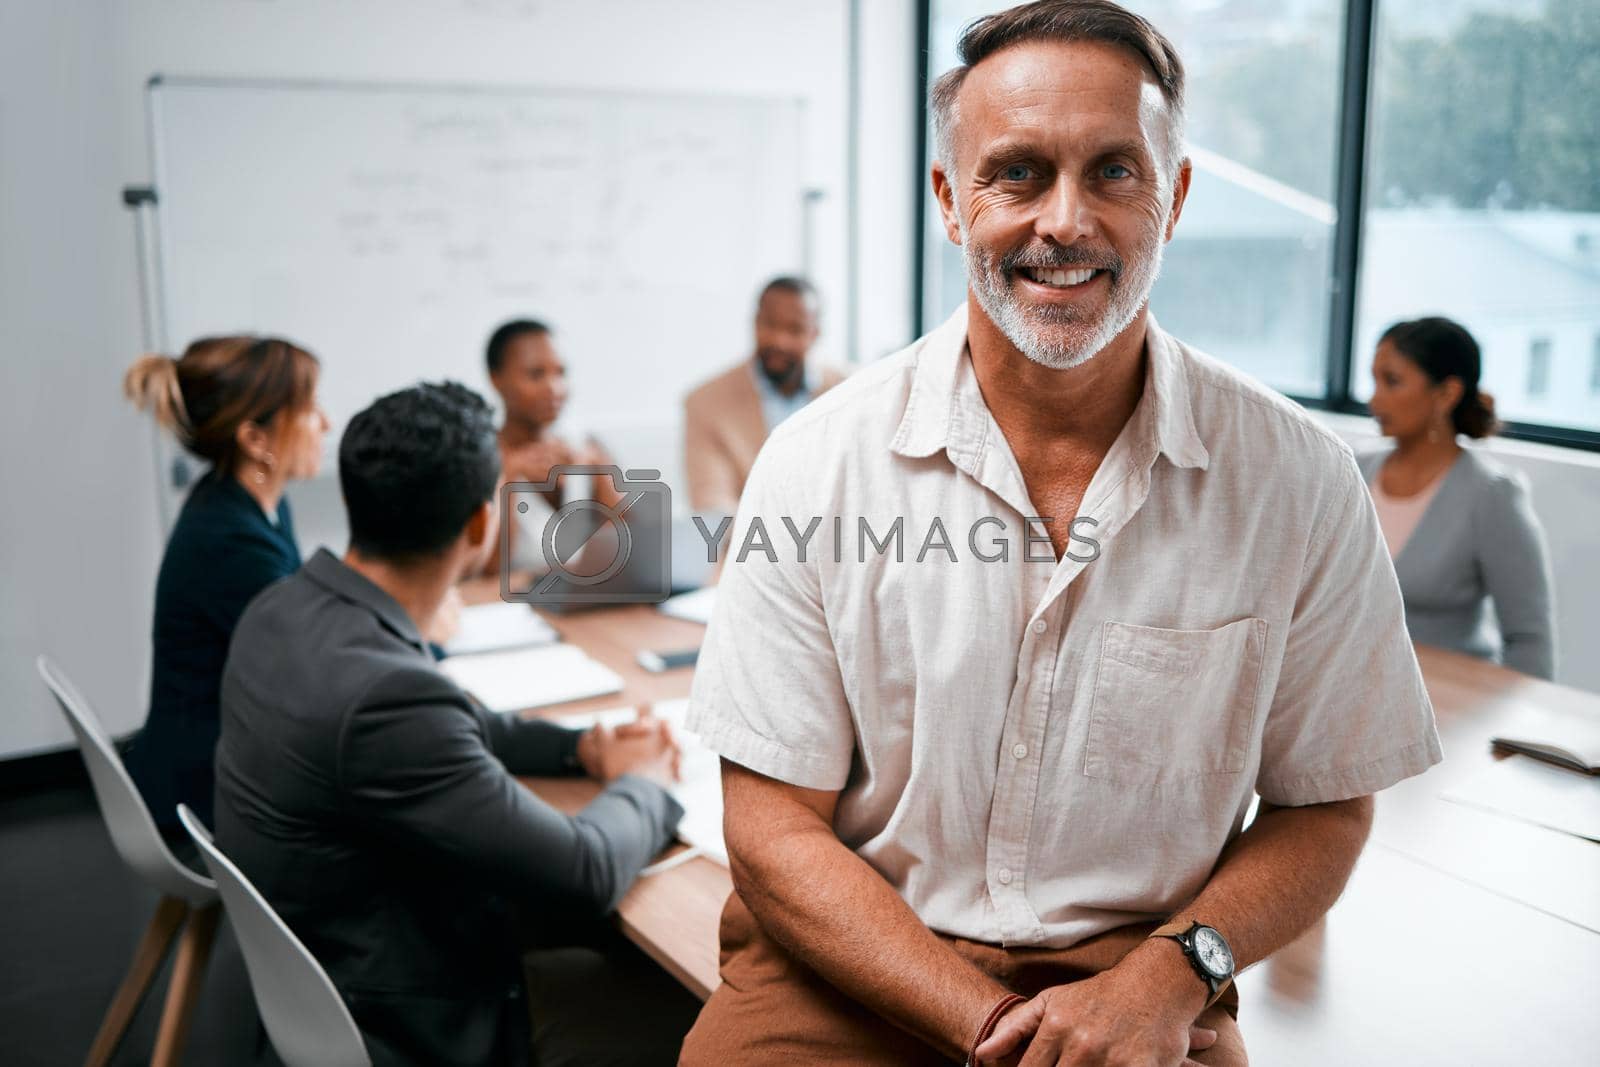 Royalty free image of Ive got an awesome team to work with. Cropped portrait of a handsome mature businessman attending a meeting in the boardroom with his colleagues in the background. by YuriArcurs